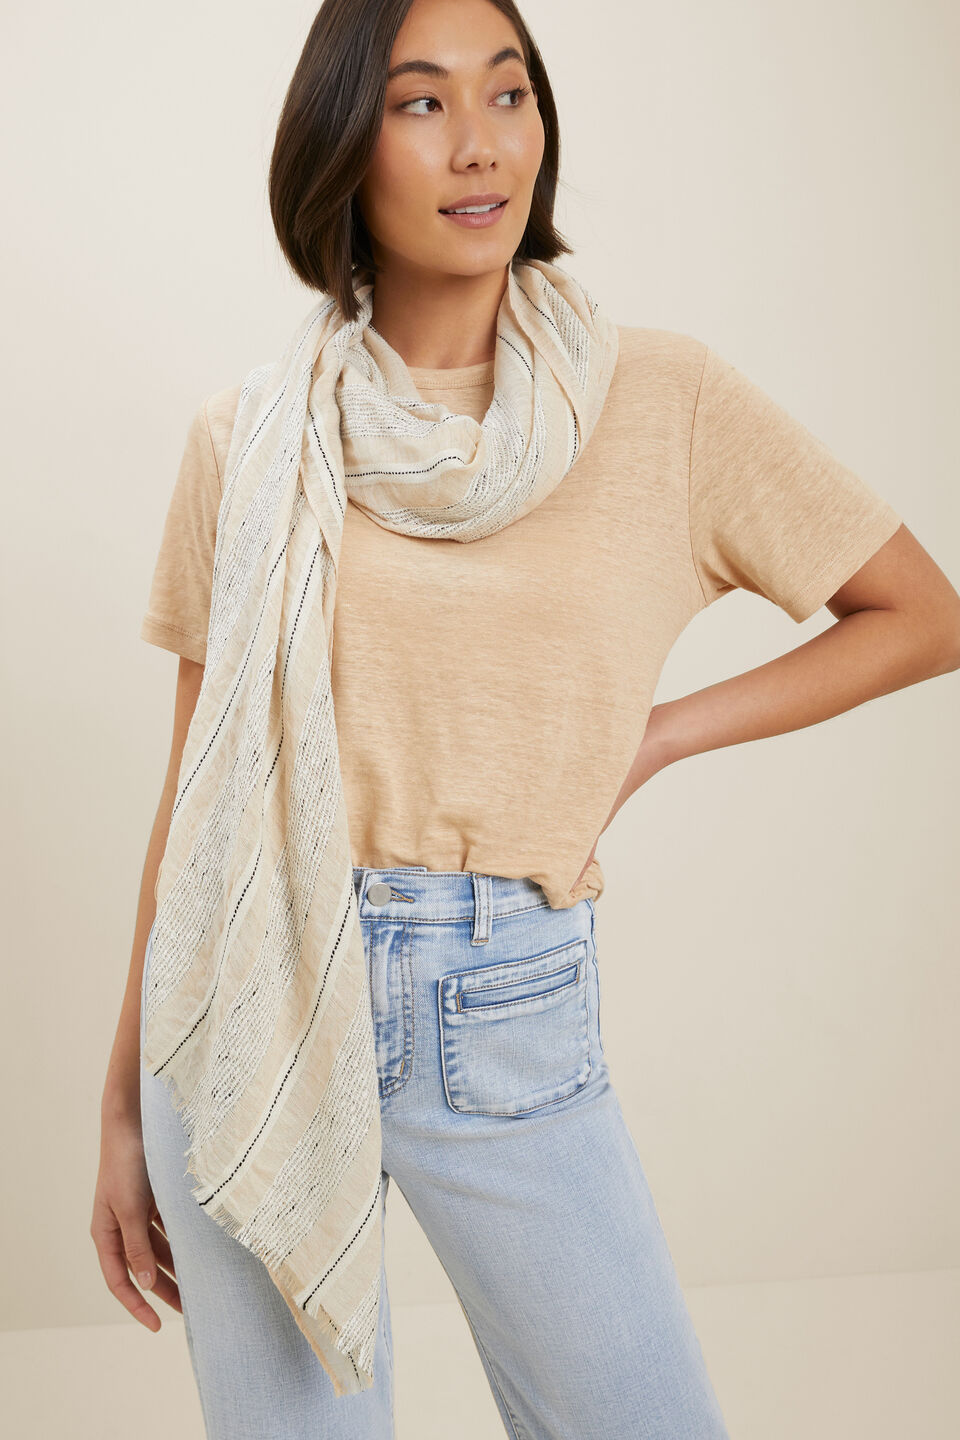 Textured Weave Scarf  Neutral Sand Multi